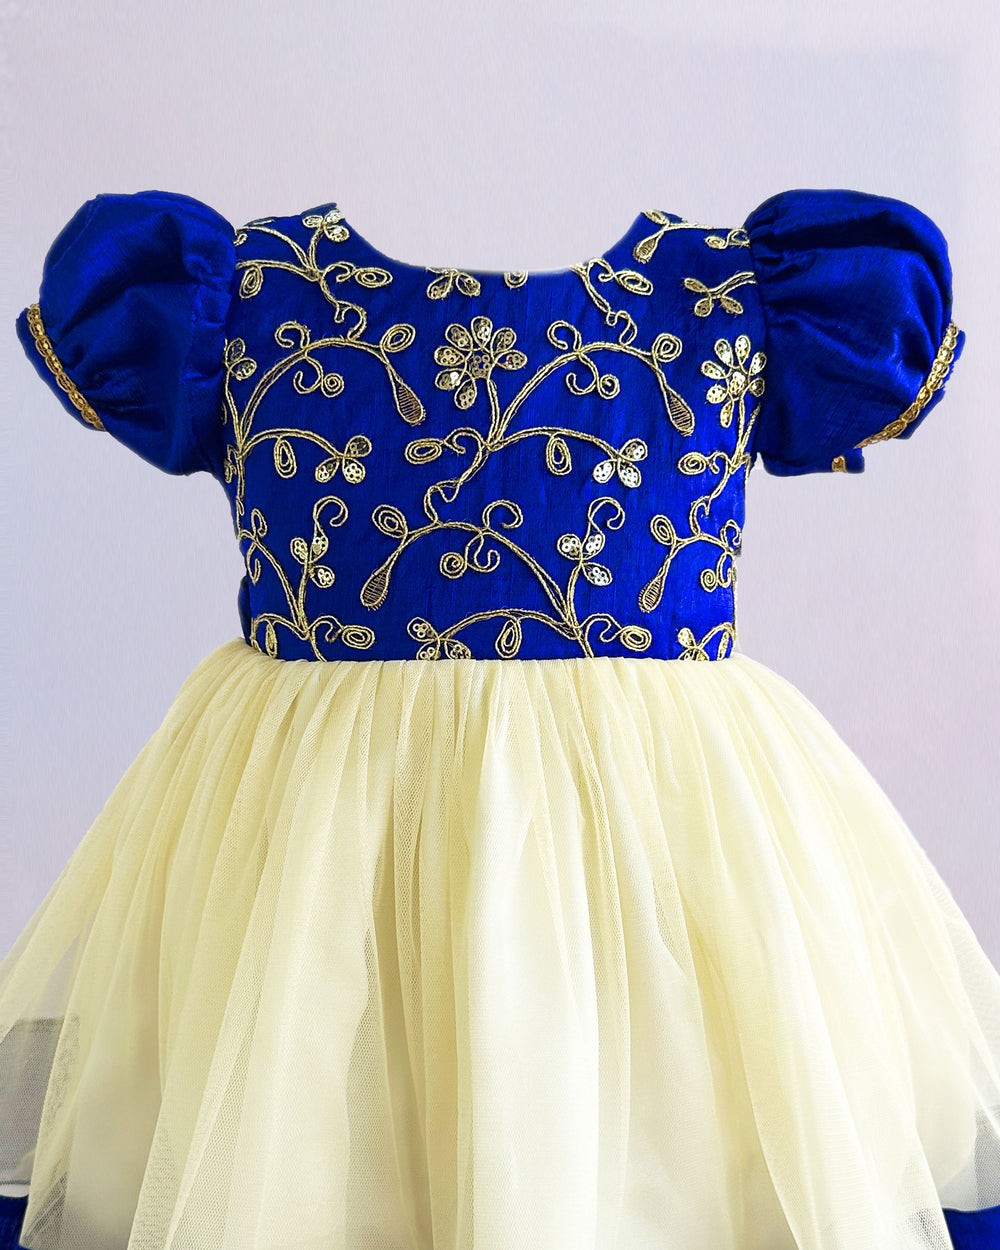 offwhite royalblue embroidery baby girls dresses kids clothing girls fashion 1-2 years 2-3 3-4 4-5 5-6 6-7 7-8 dresses